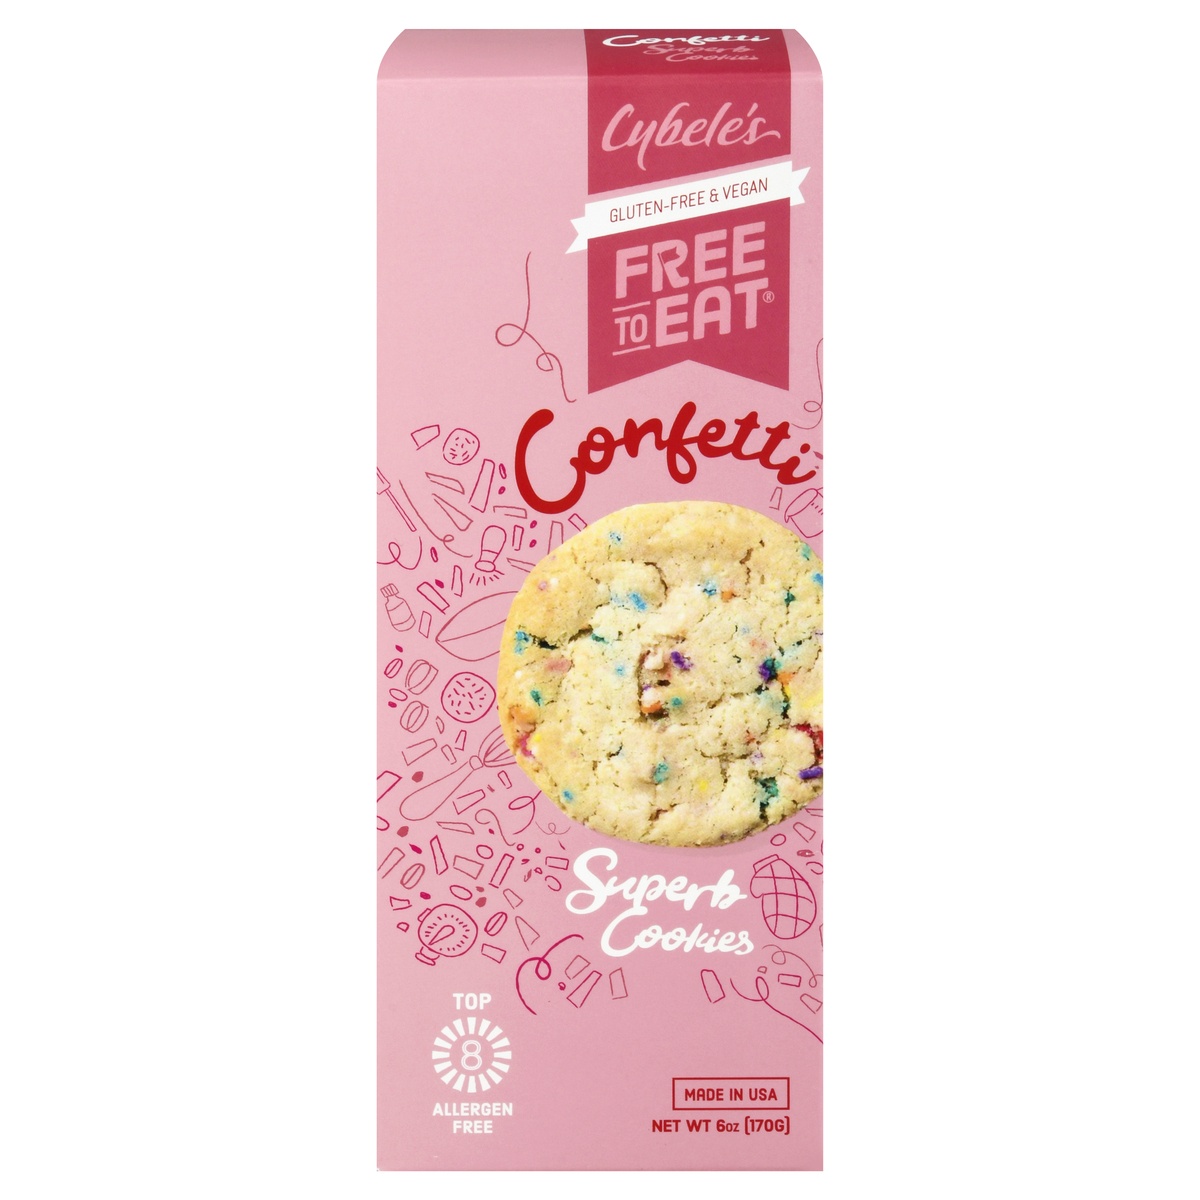 slide 1 of 1, Cybele's Free To Eat Gluten Free Confetti Cookies, 6 oz